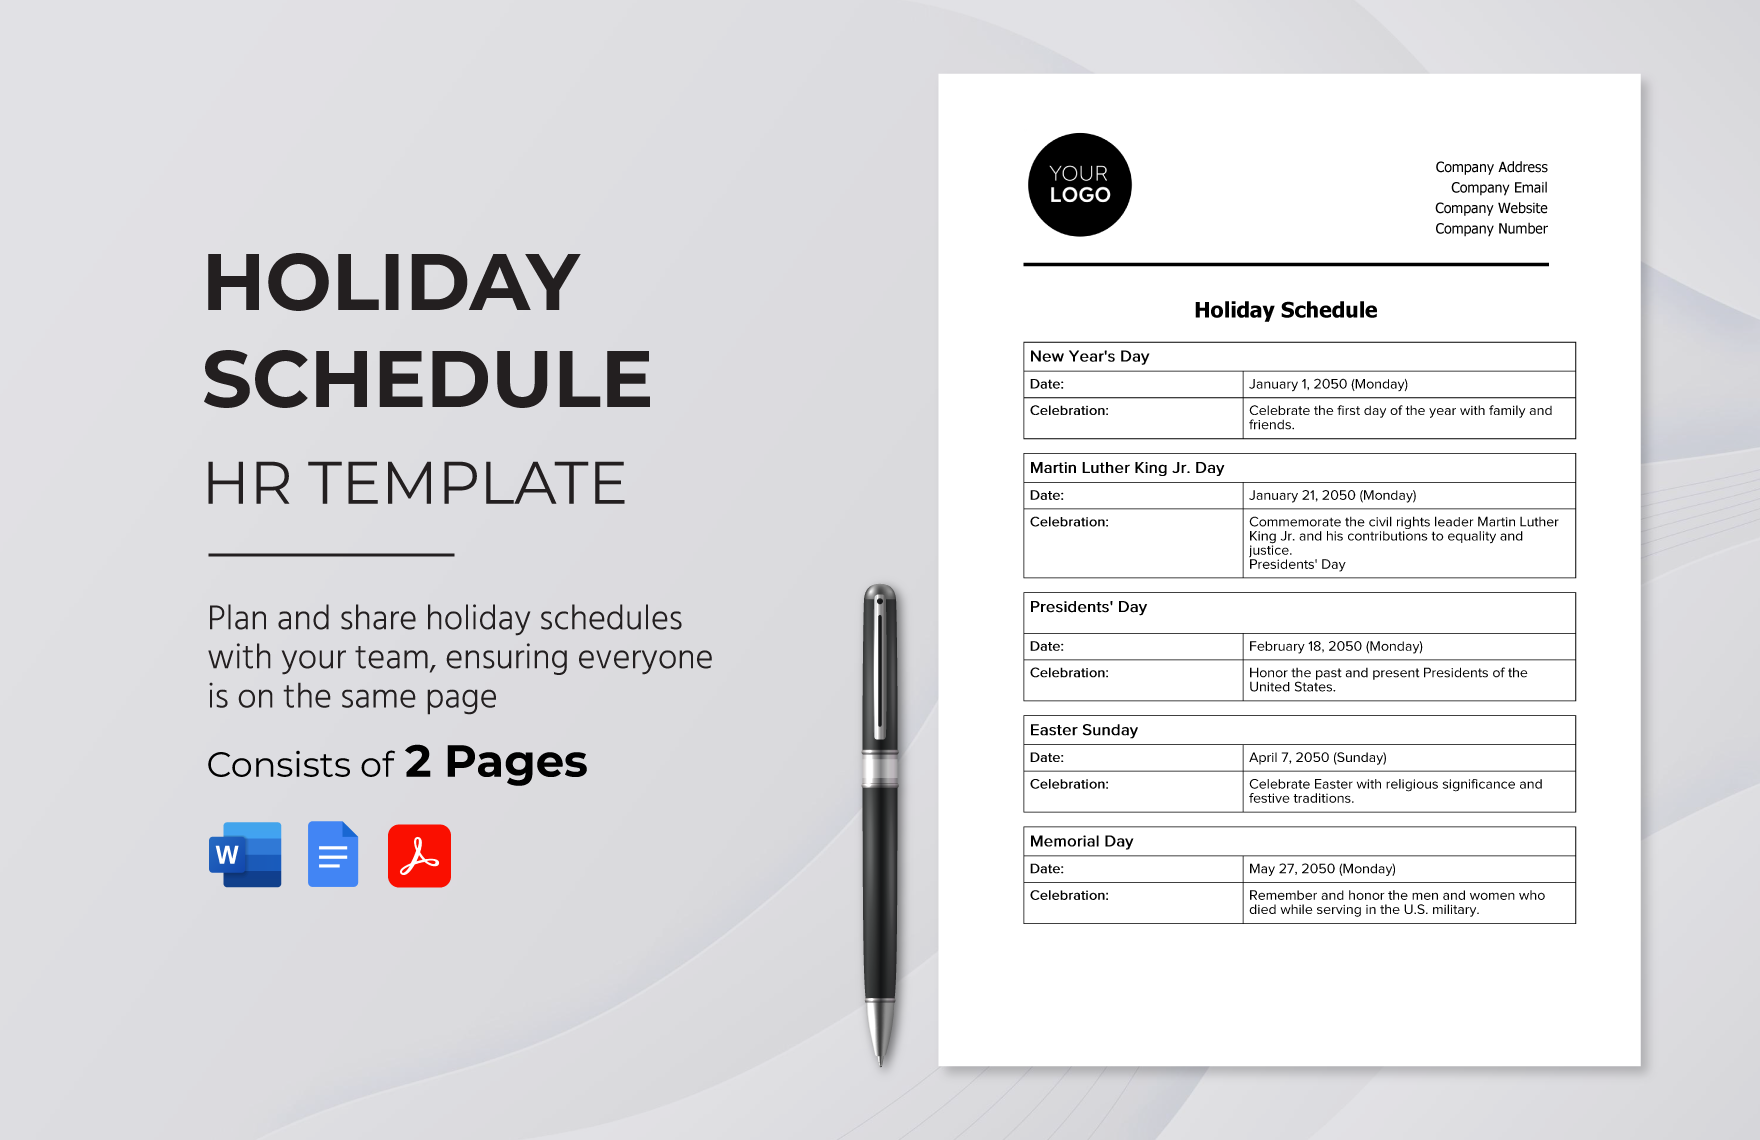 Holiday Schedule HR Template